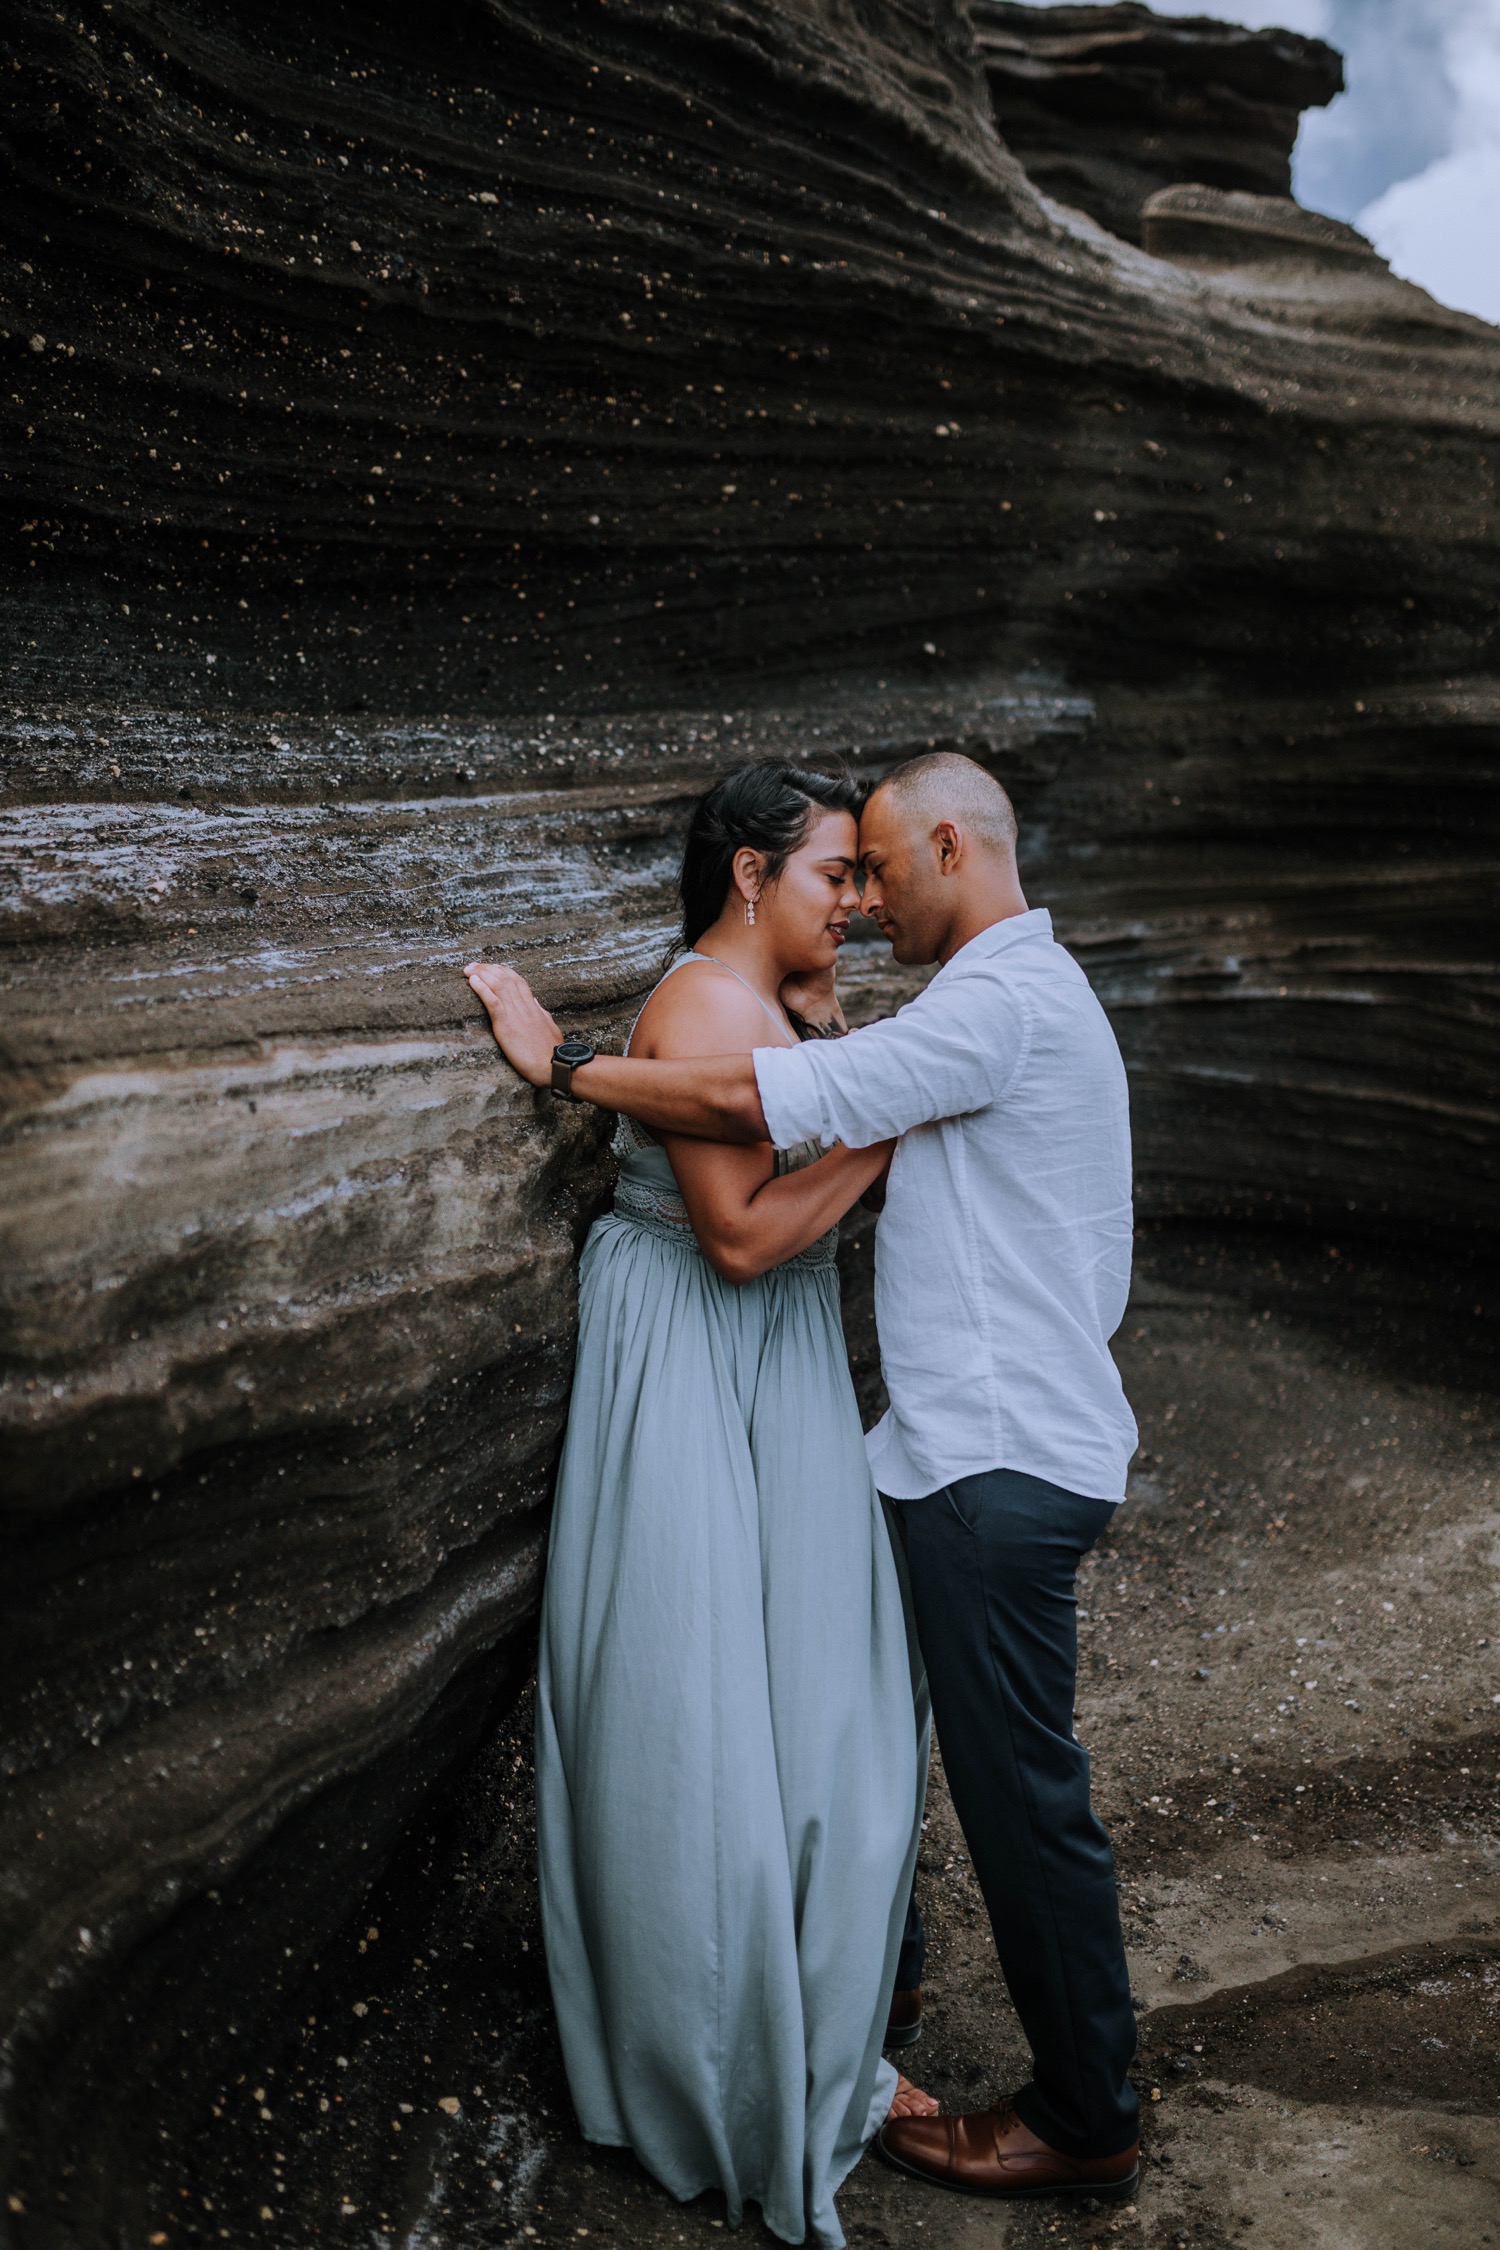 How A Photoshoot For A Marriage Proposal in Puerto Rico Went - Local Lens